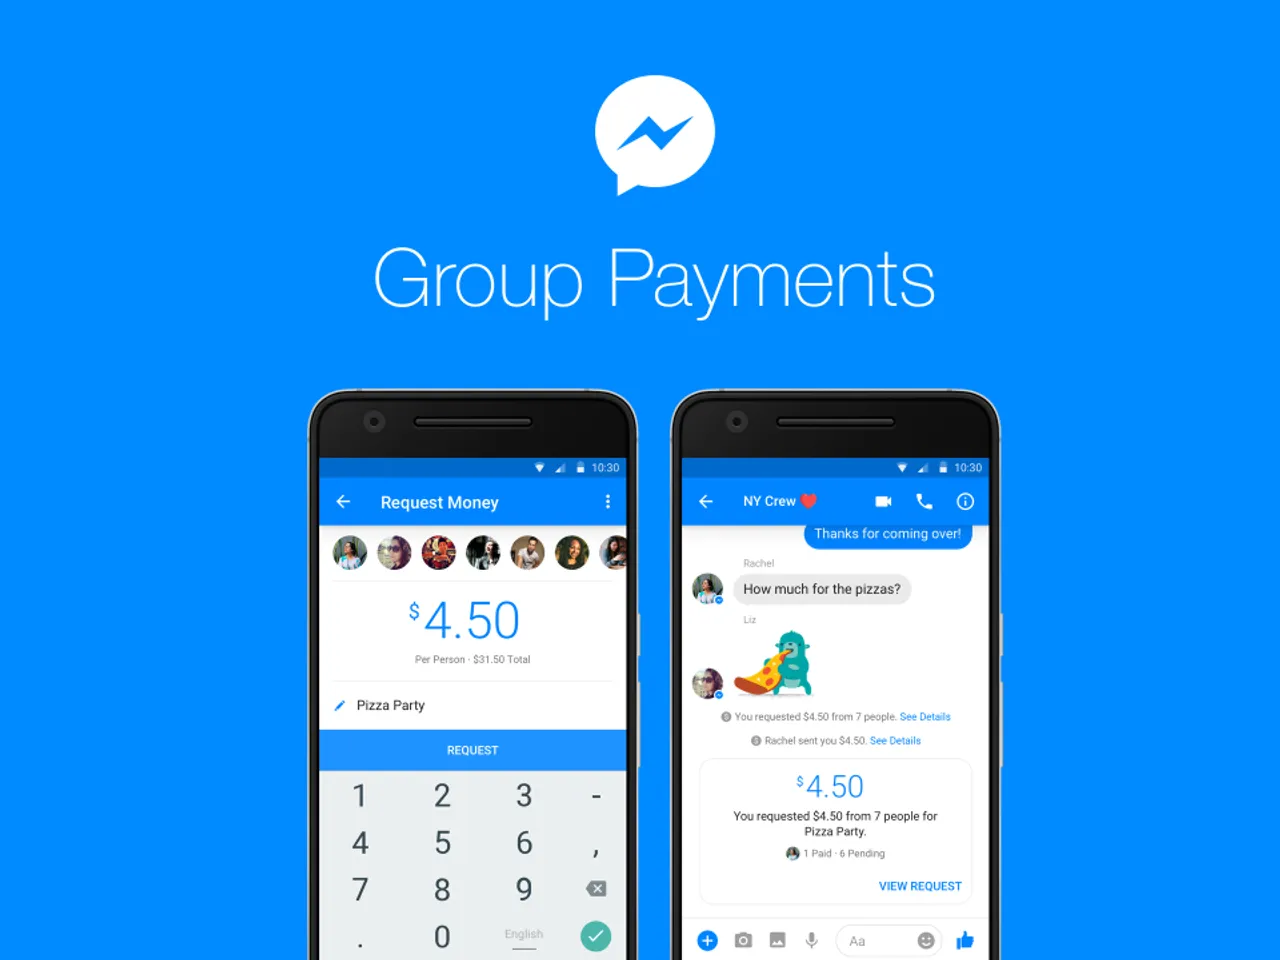 CIOL Facebook expands the payment feature to groups within Messenger